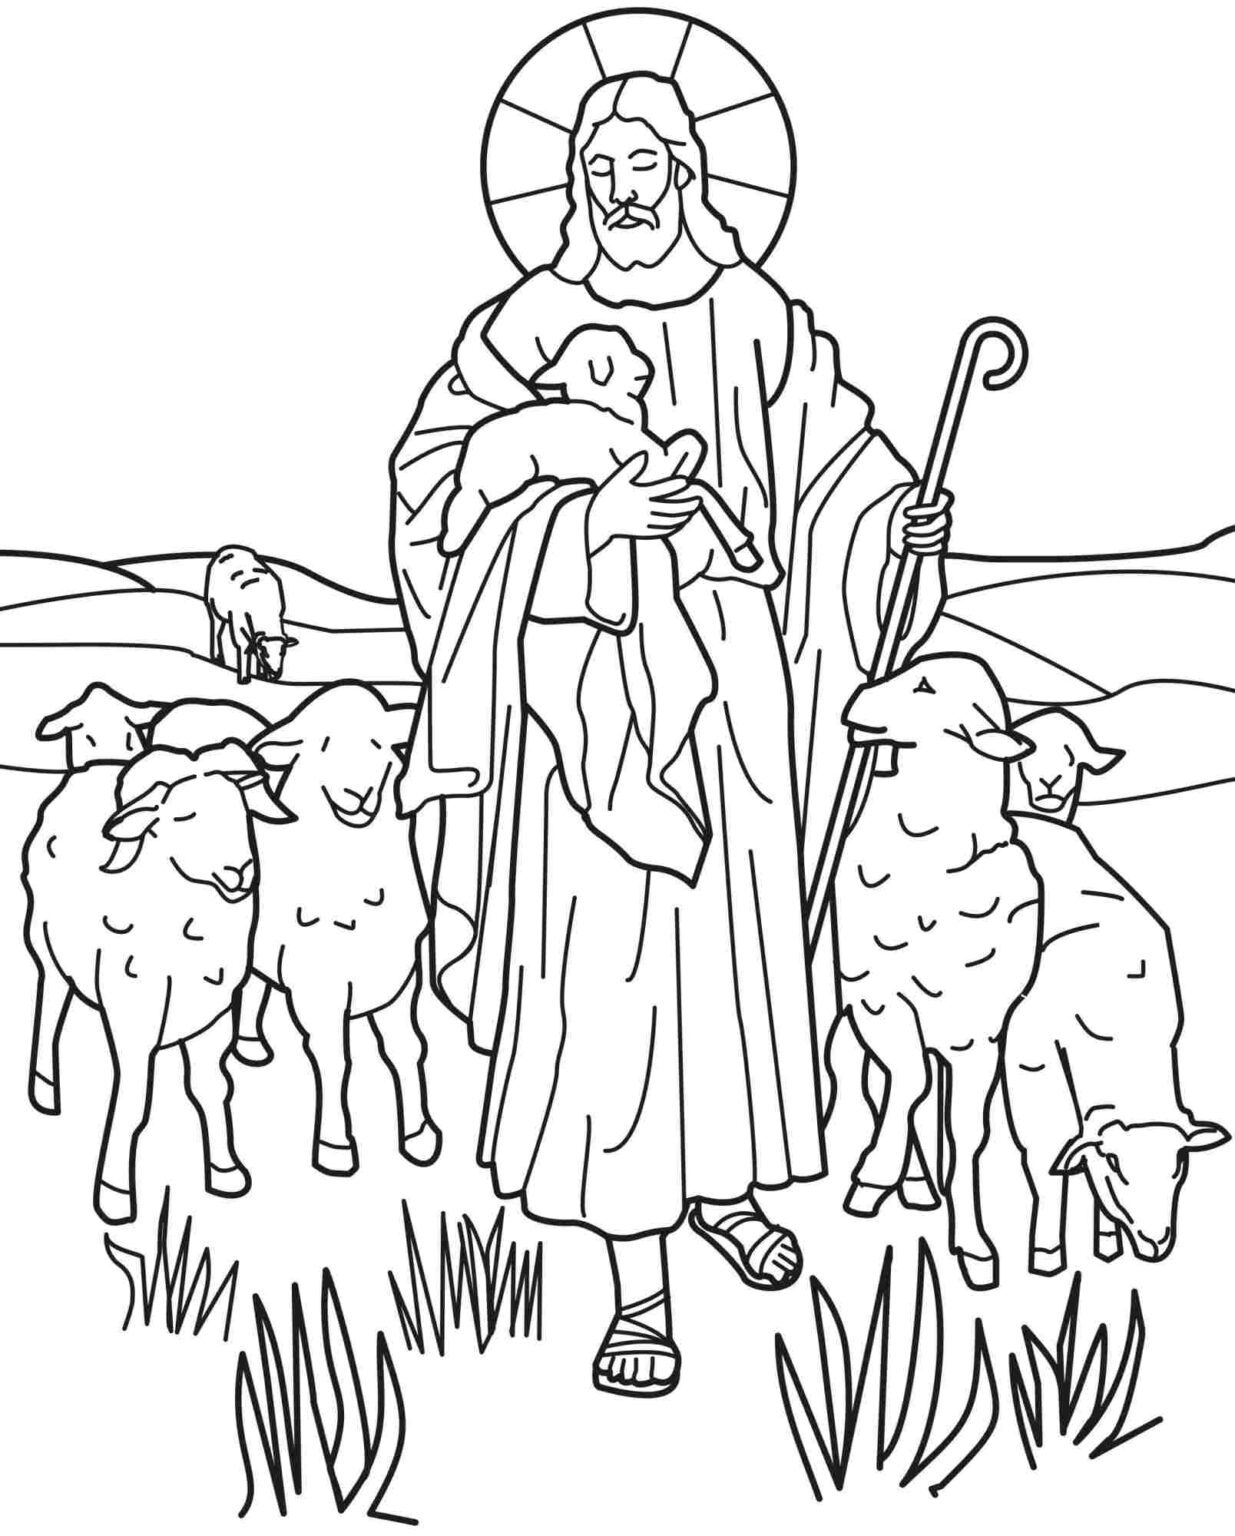 christian-coloring-pages-pdf-free-printable-coloringfolder